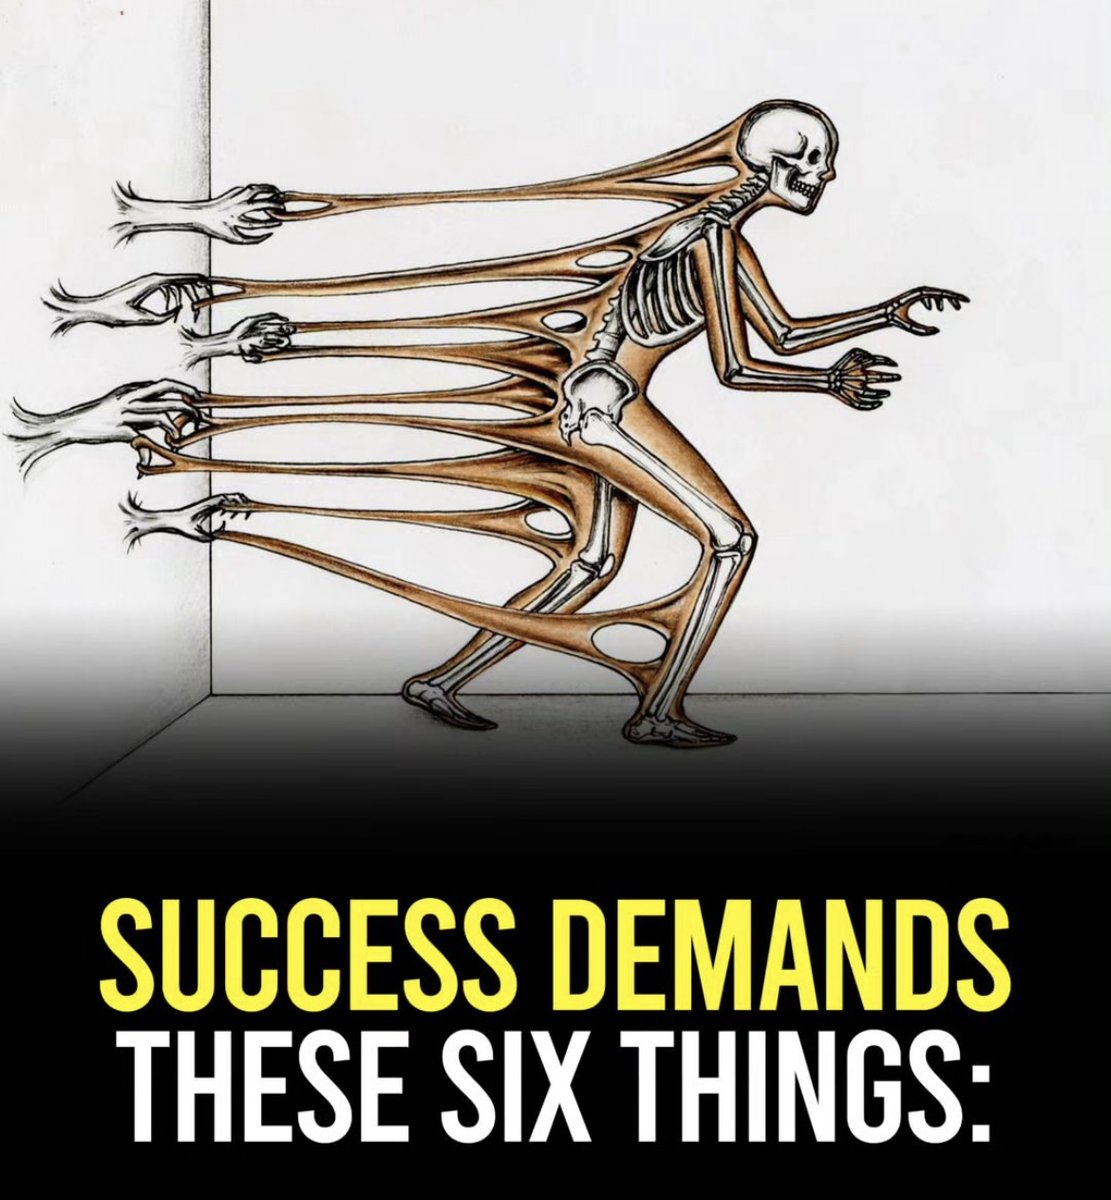 SUCCESS DEMANDS THESE SIX THINGS: